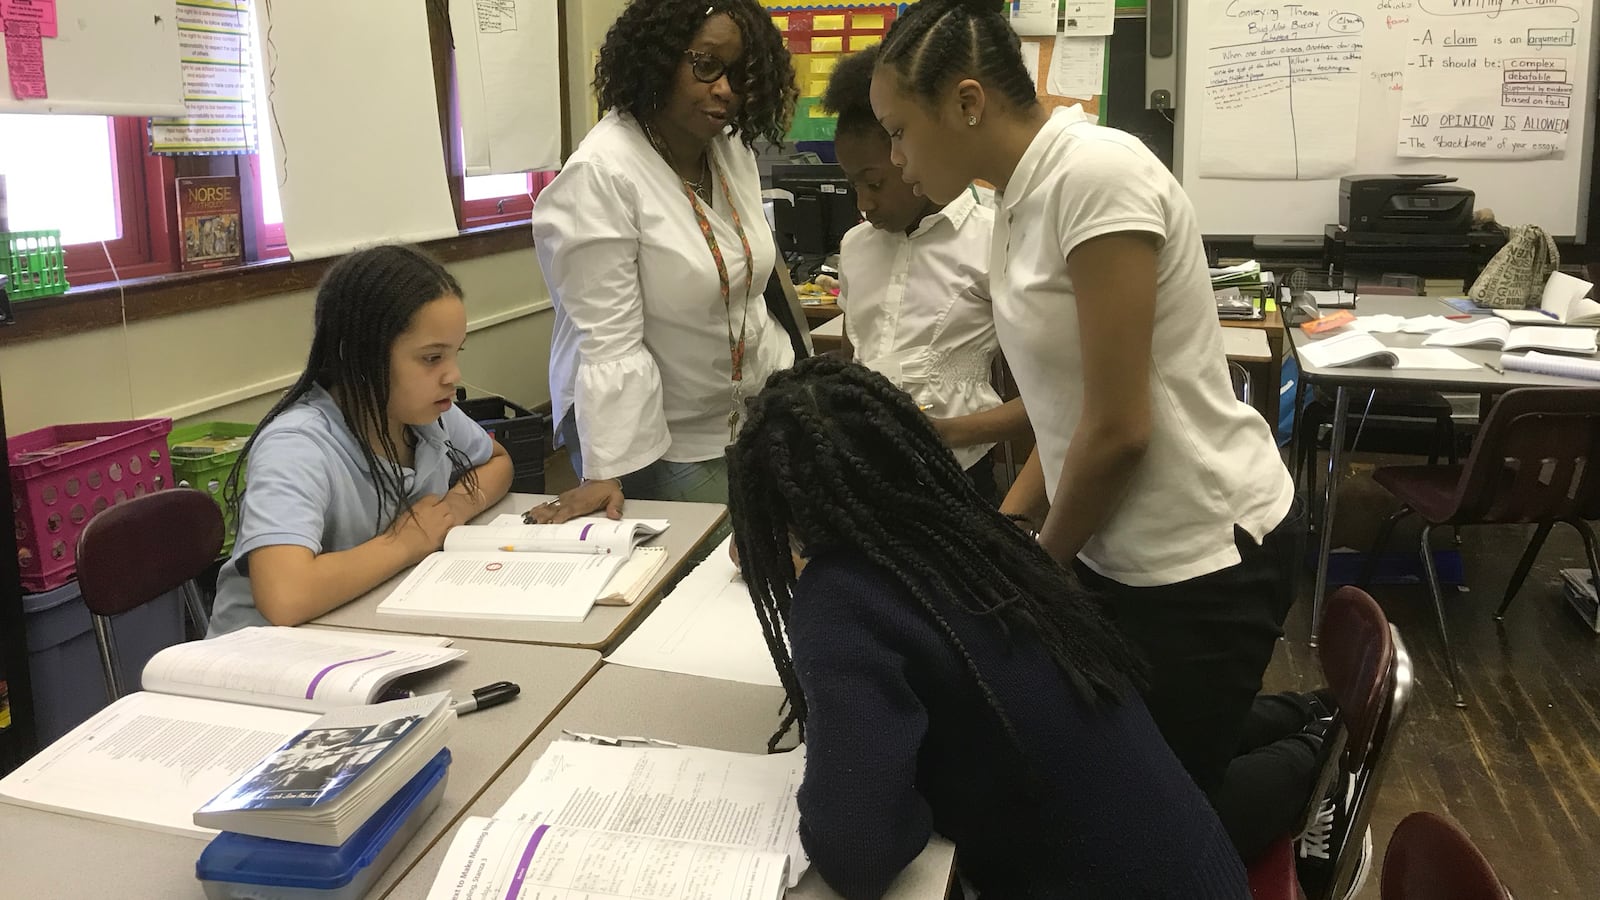 Welia Dawson, a teacher at Paul Robeson Malcolm X Academy, works with some of her sixth grade students during a class lesson.